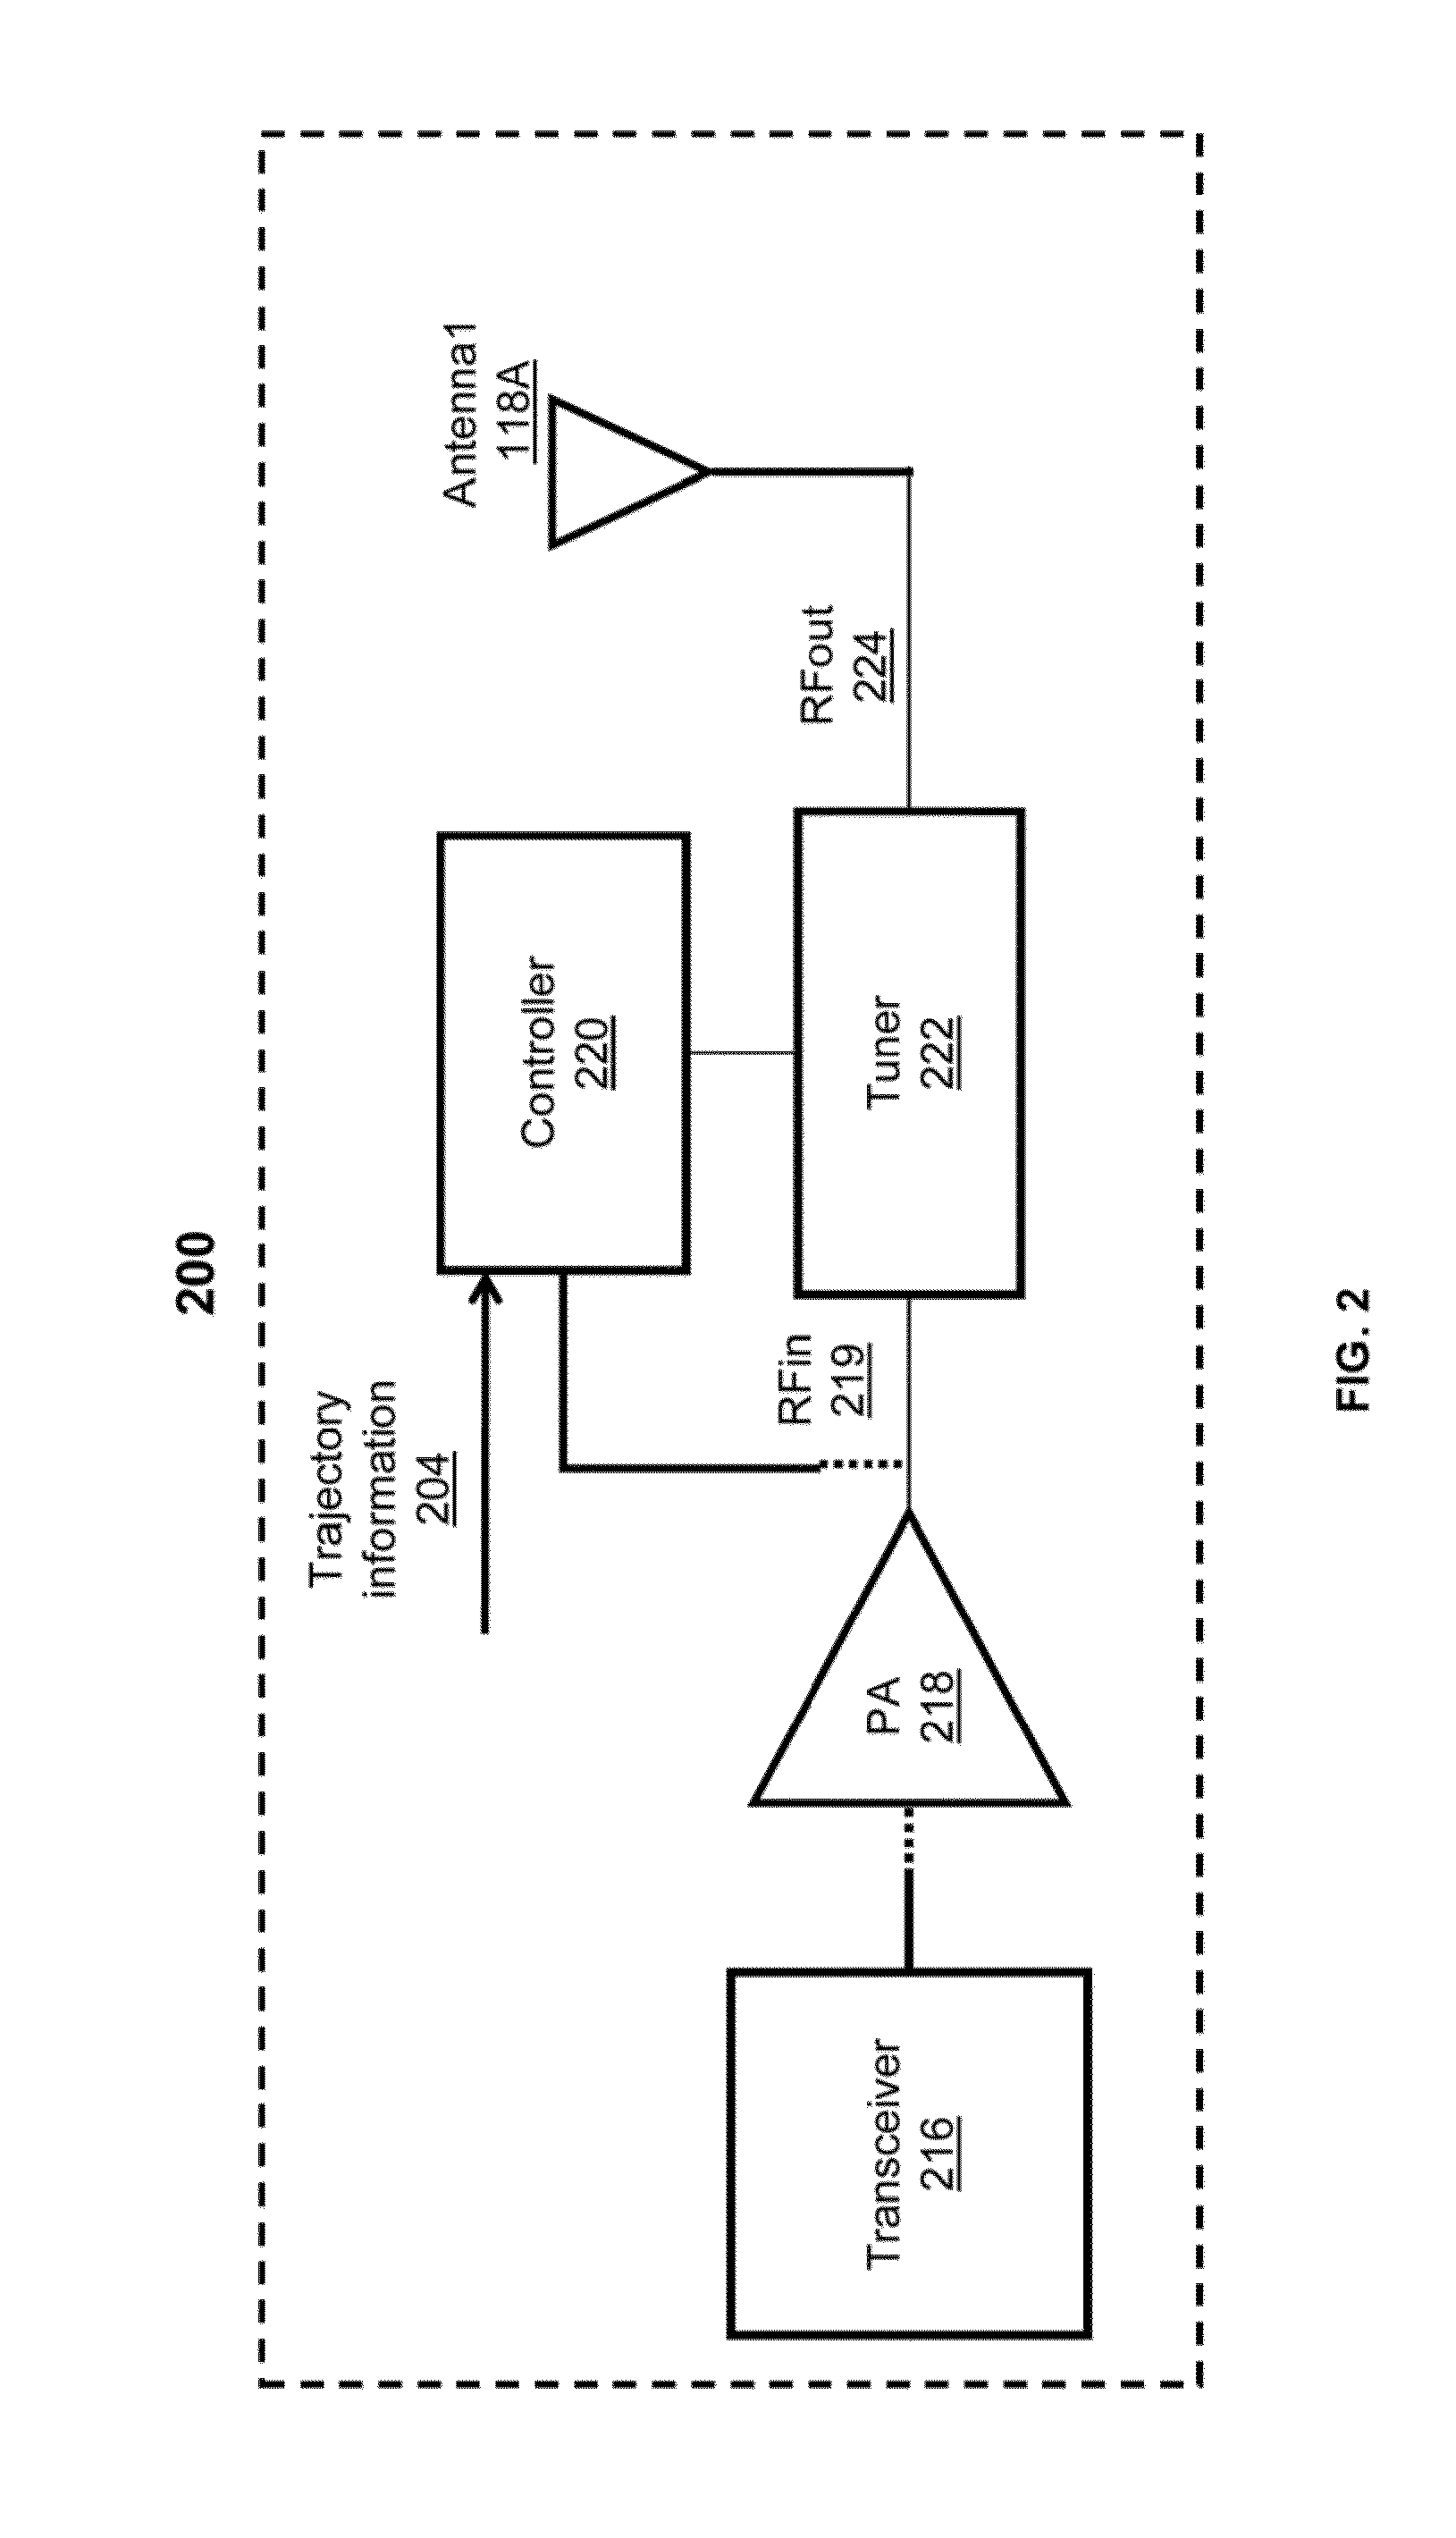 Antenna tuning on an impedance trajectory